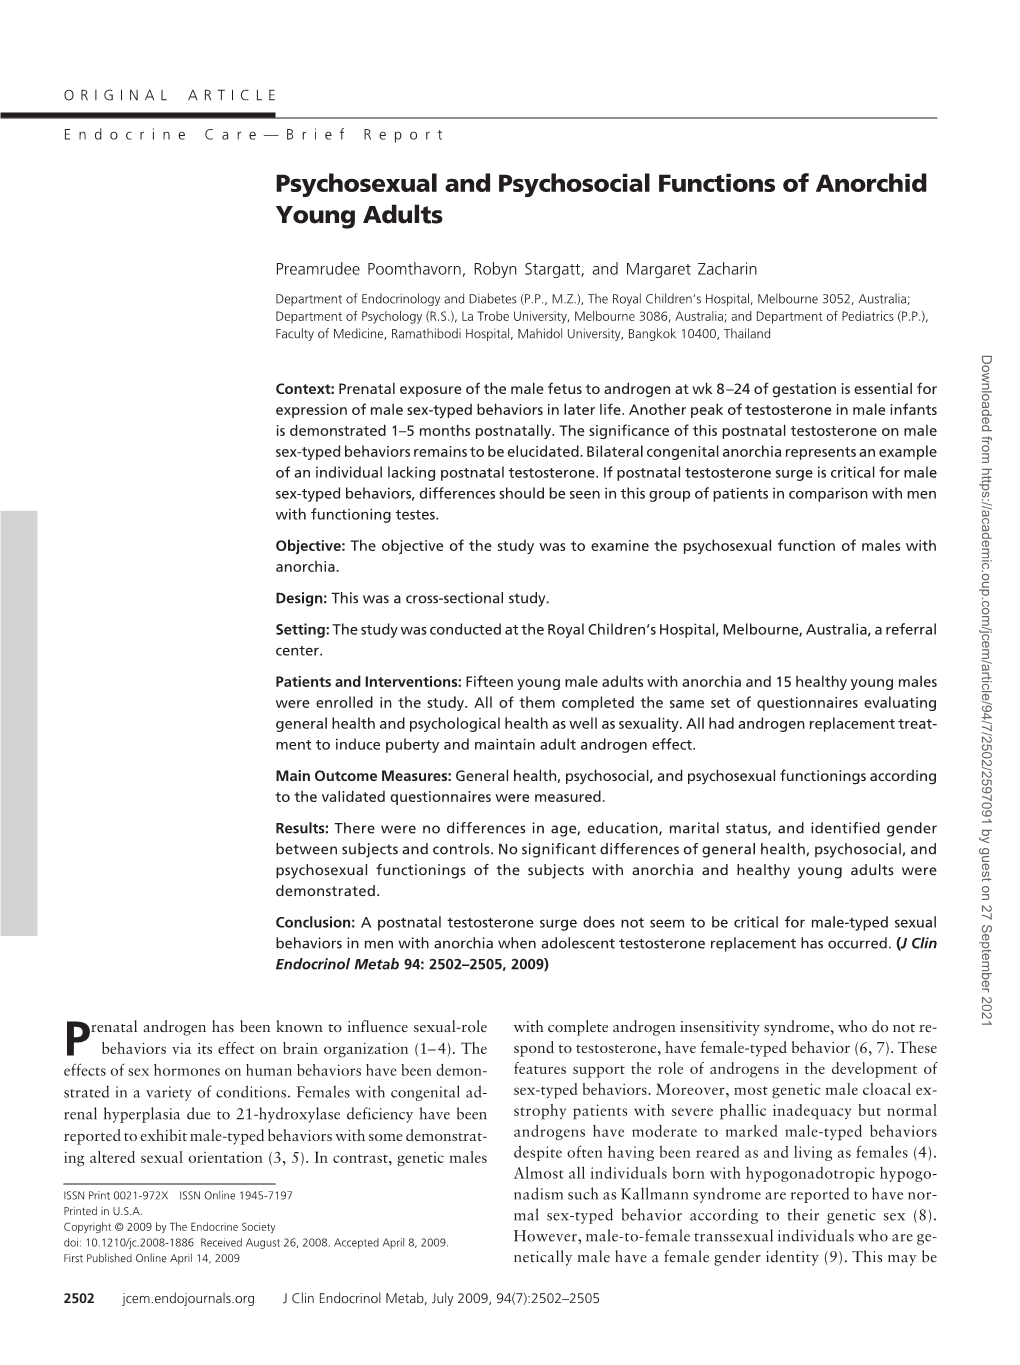 Psychosexual and Psychosocial Functions of Anorchid Young Adults